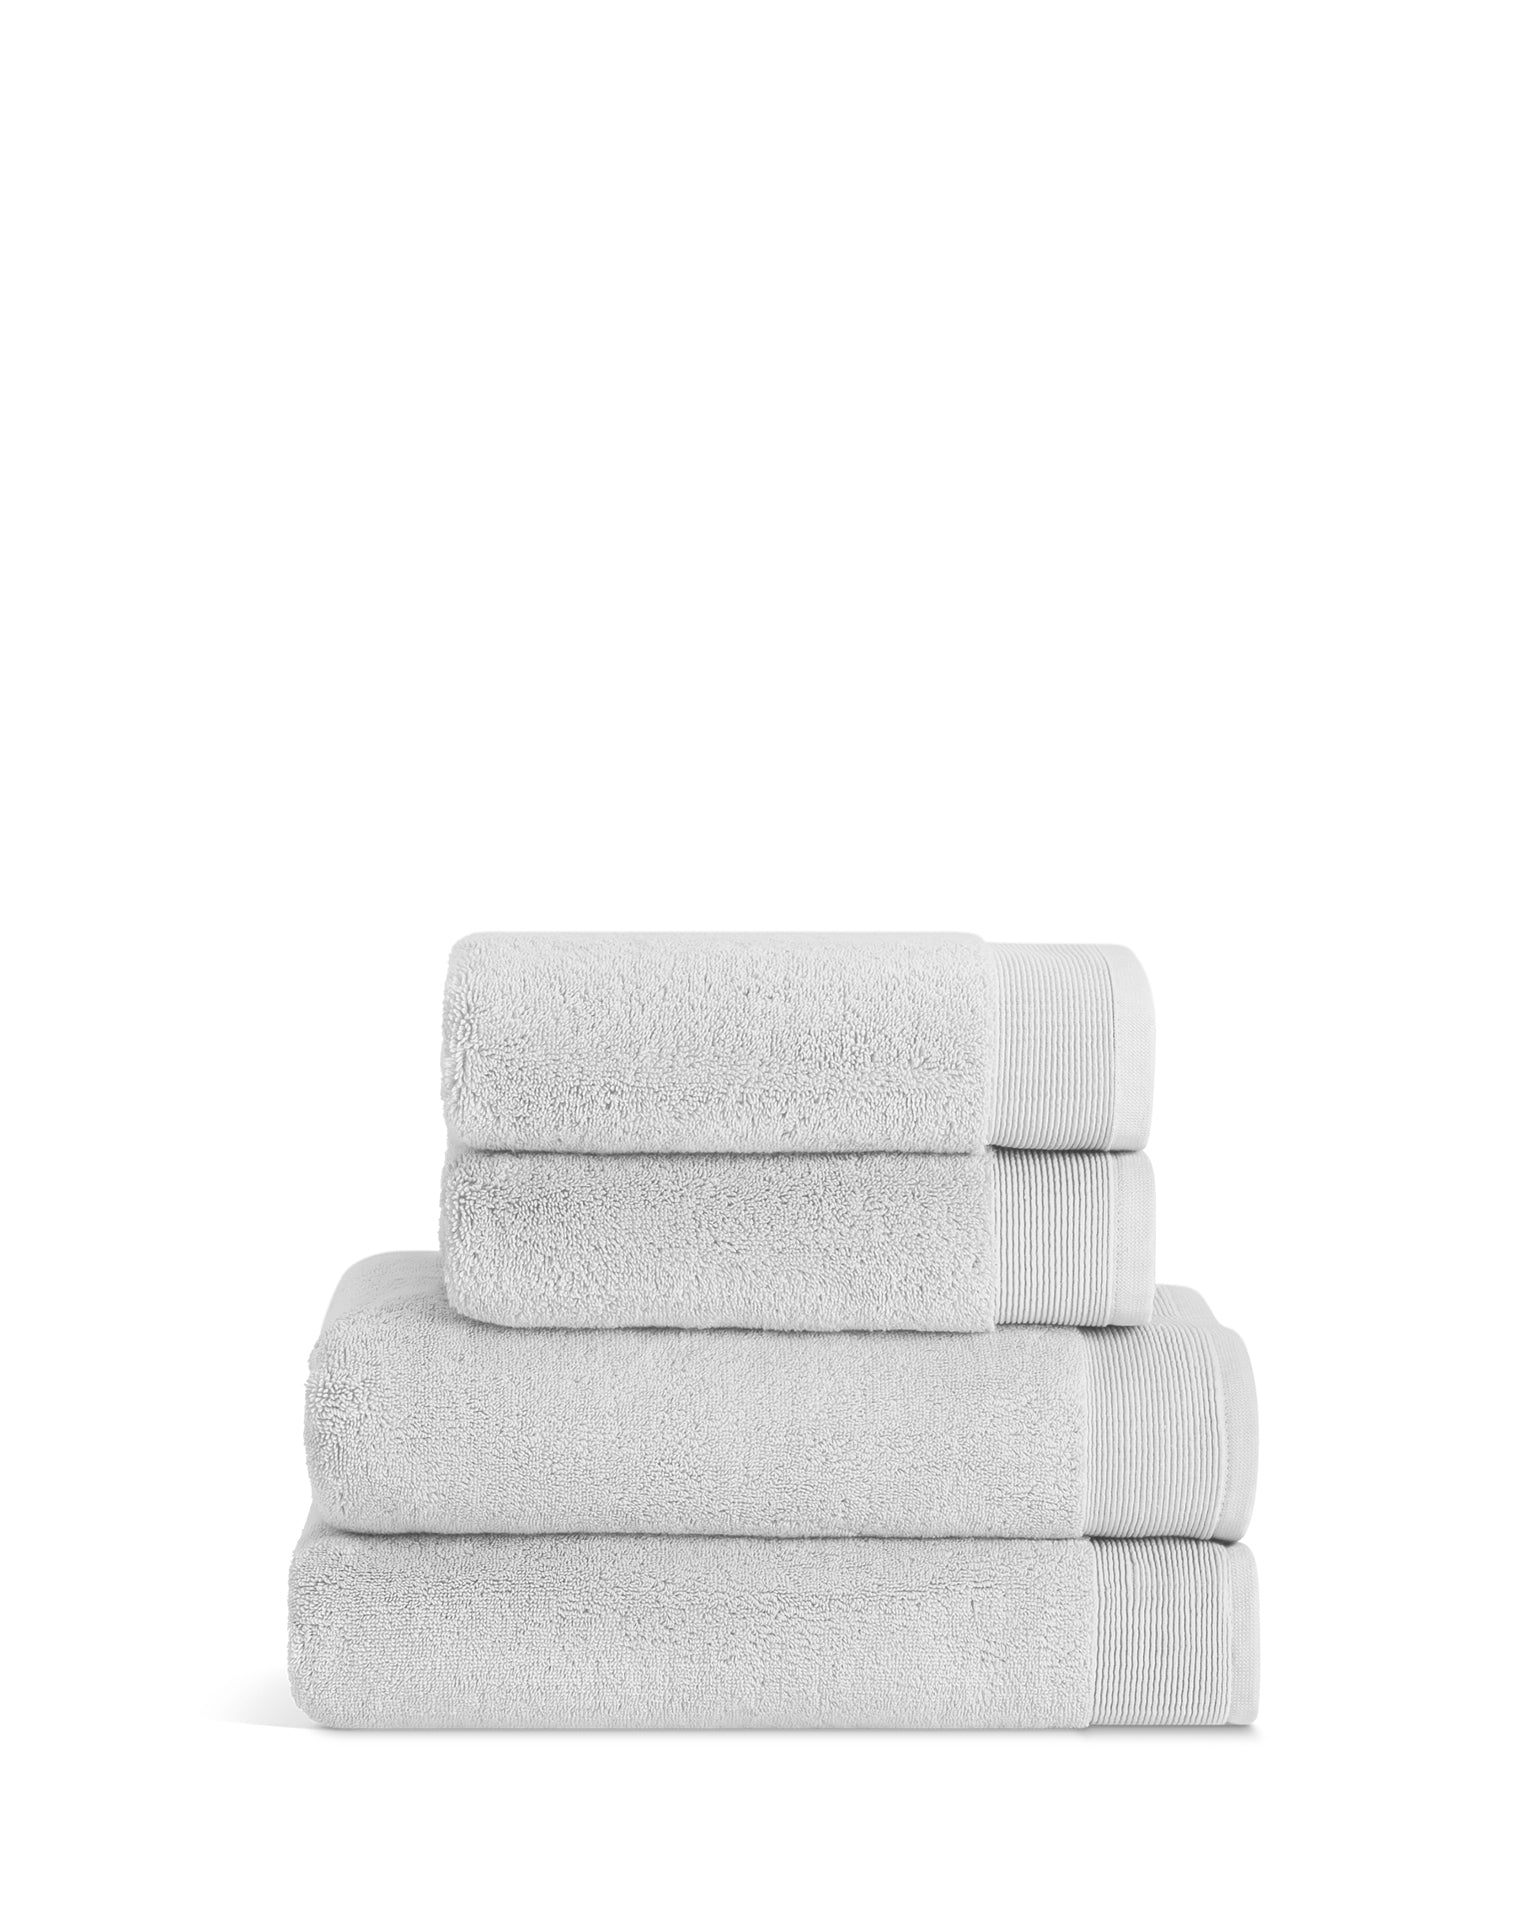 Onsen Towel Review: The last bathroom towel you will ever buy!